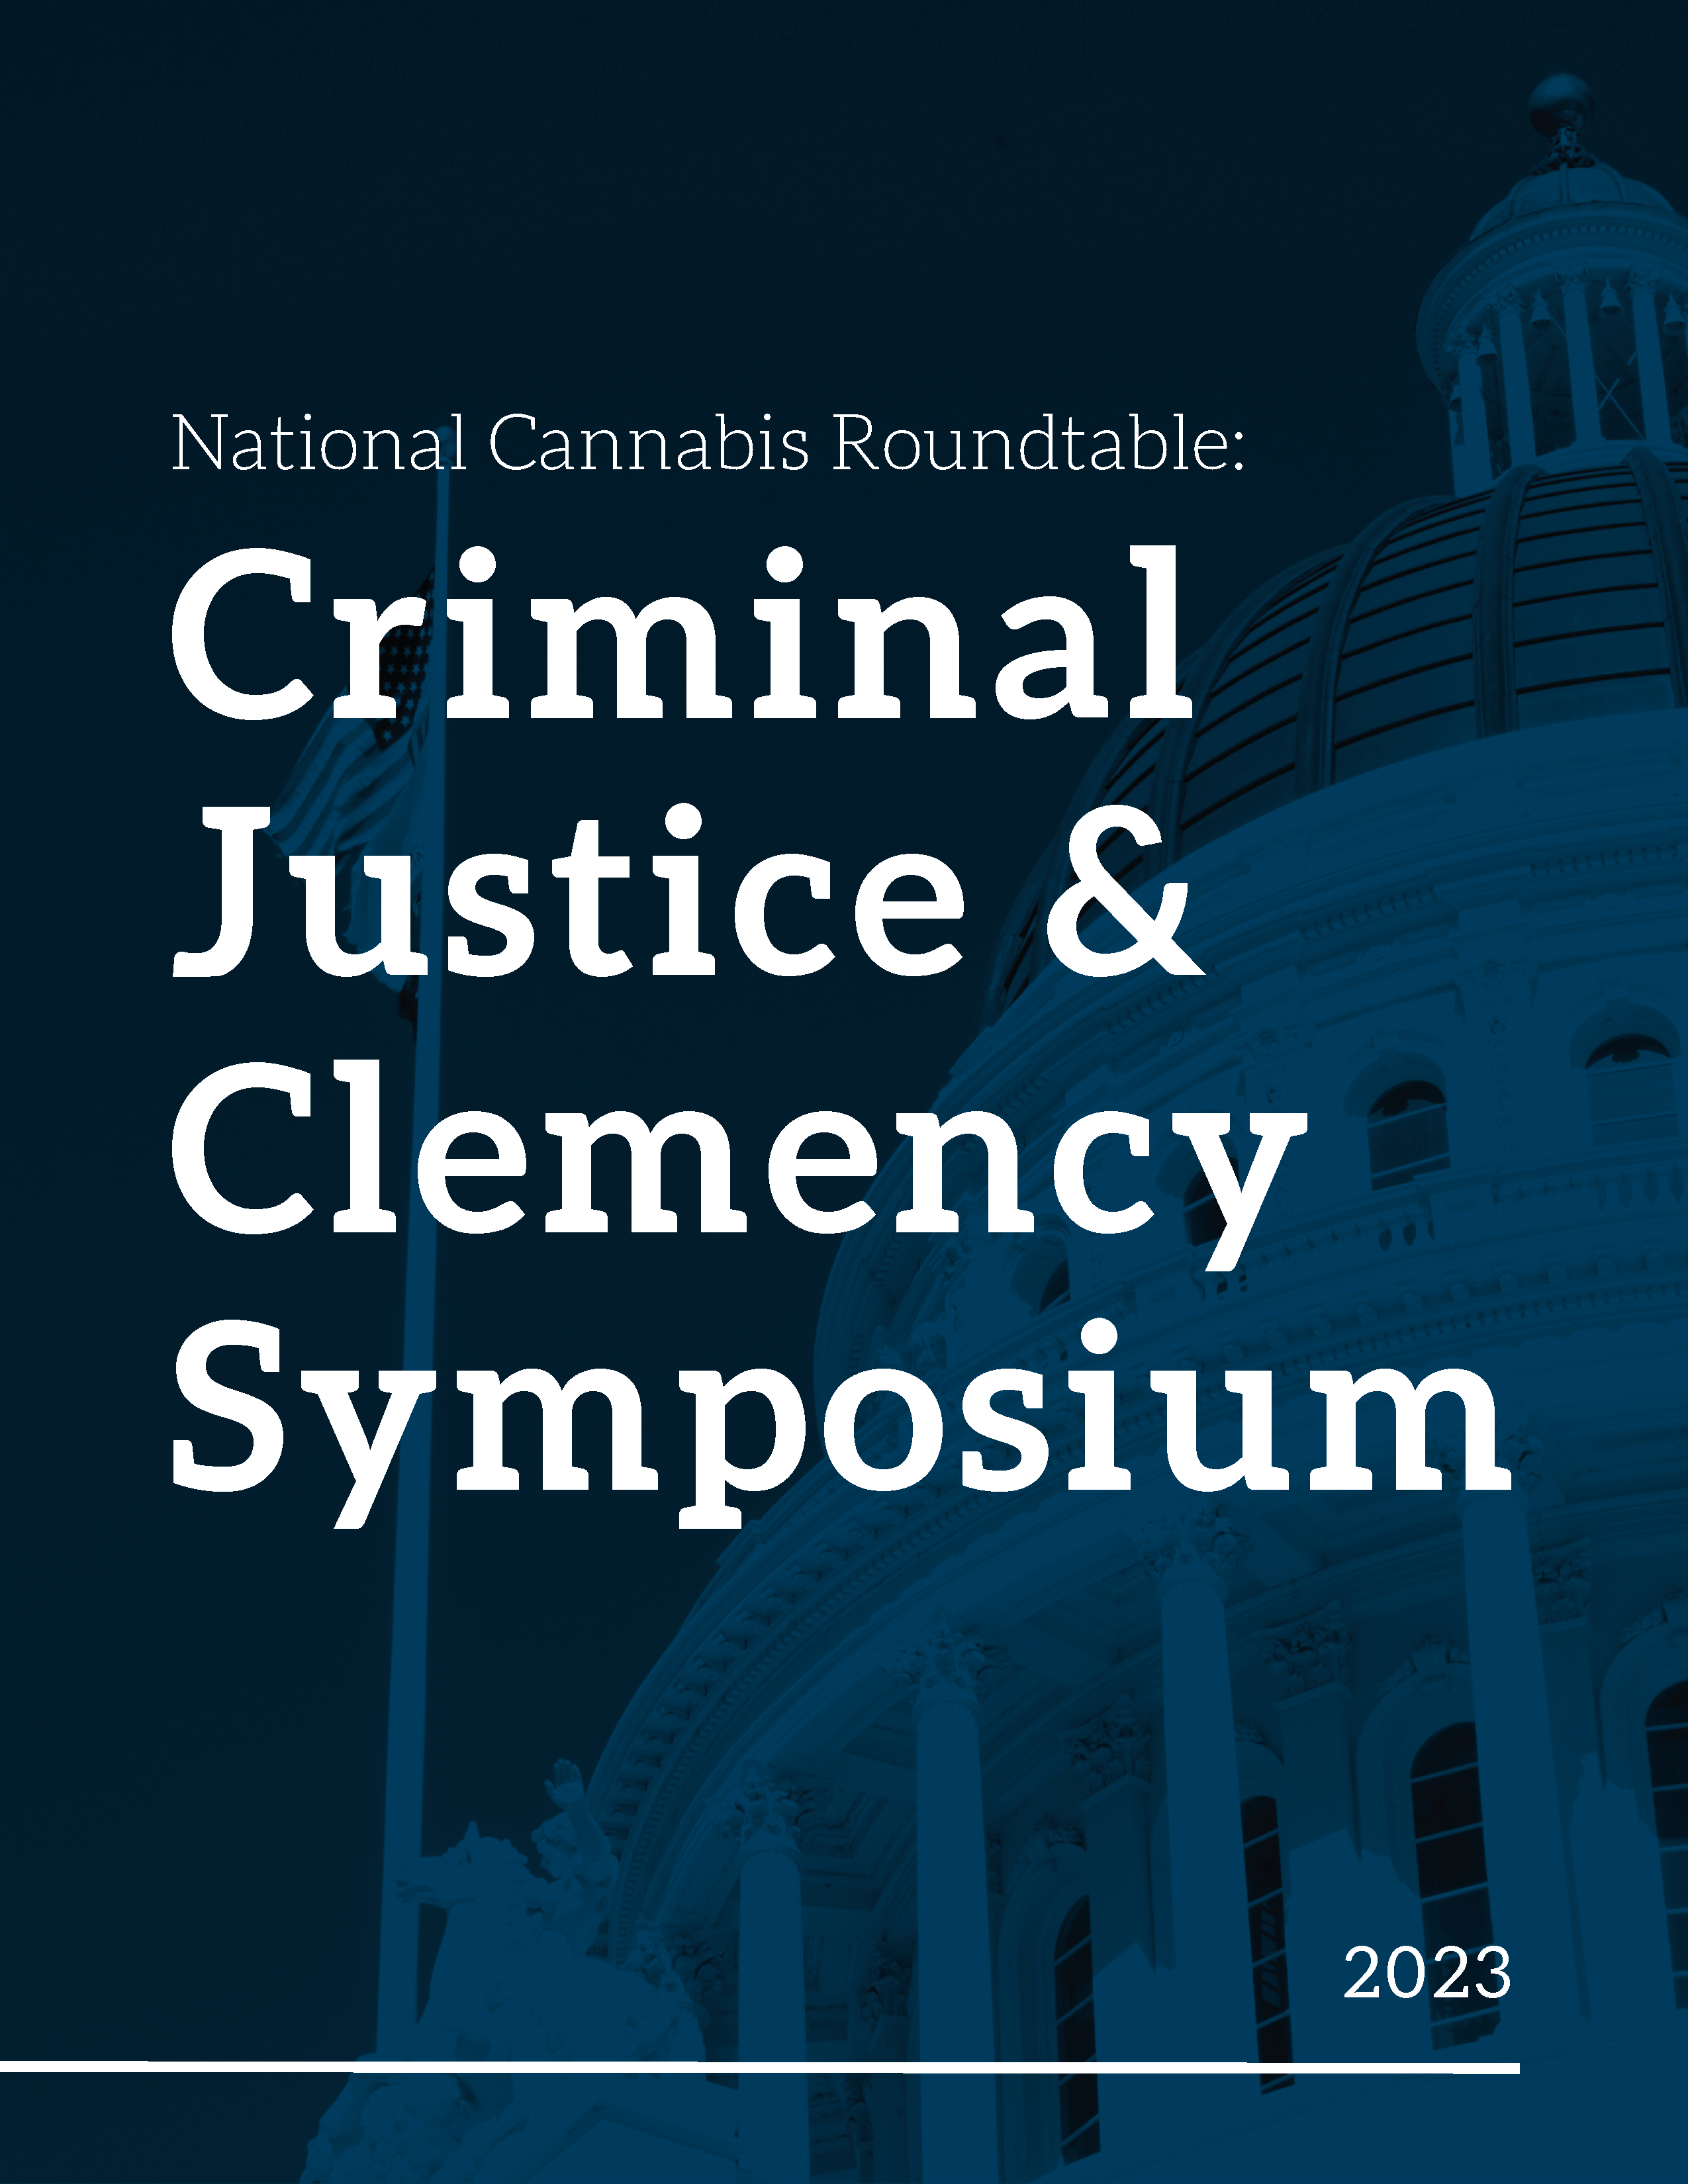 National Cannabis Roundtable Symposium Report 3.15_Page_01